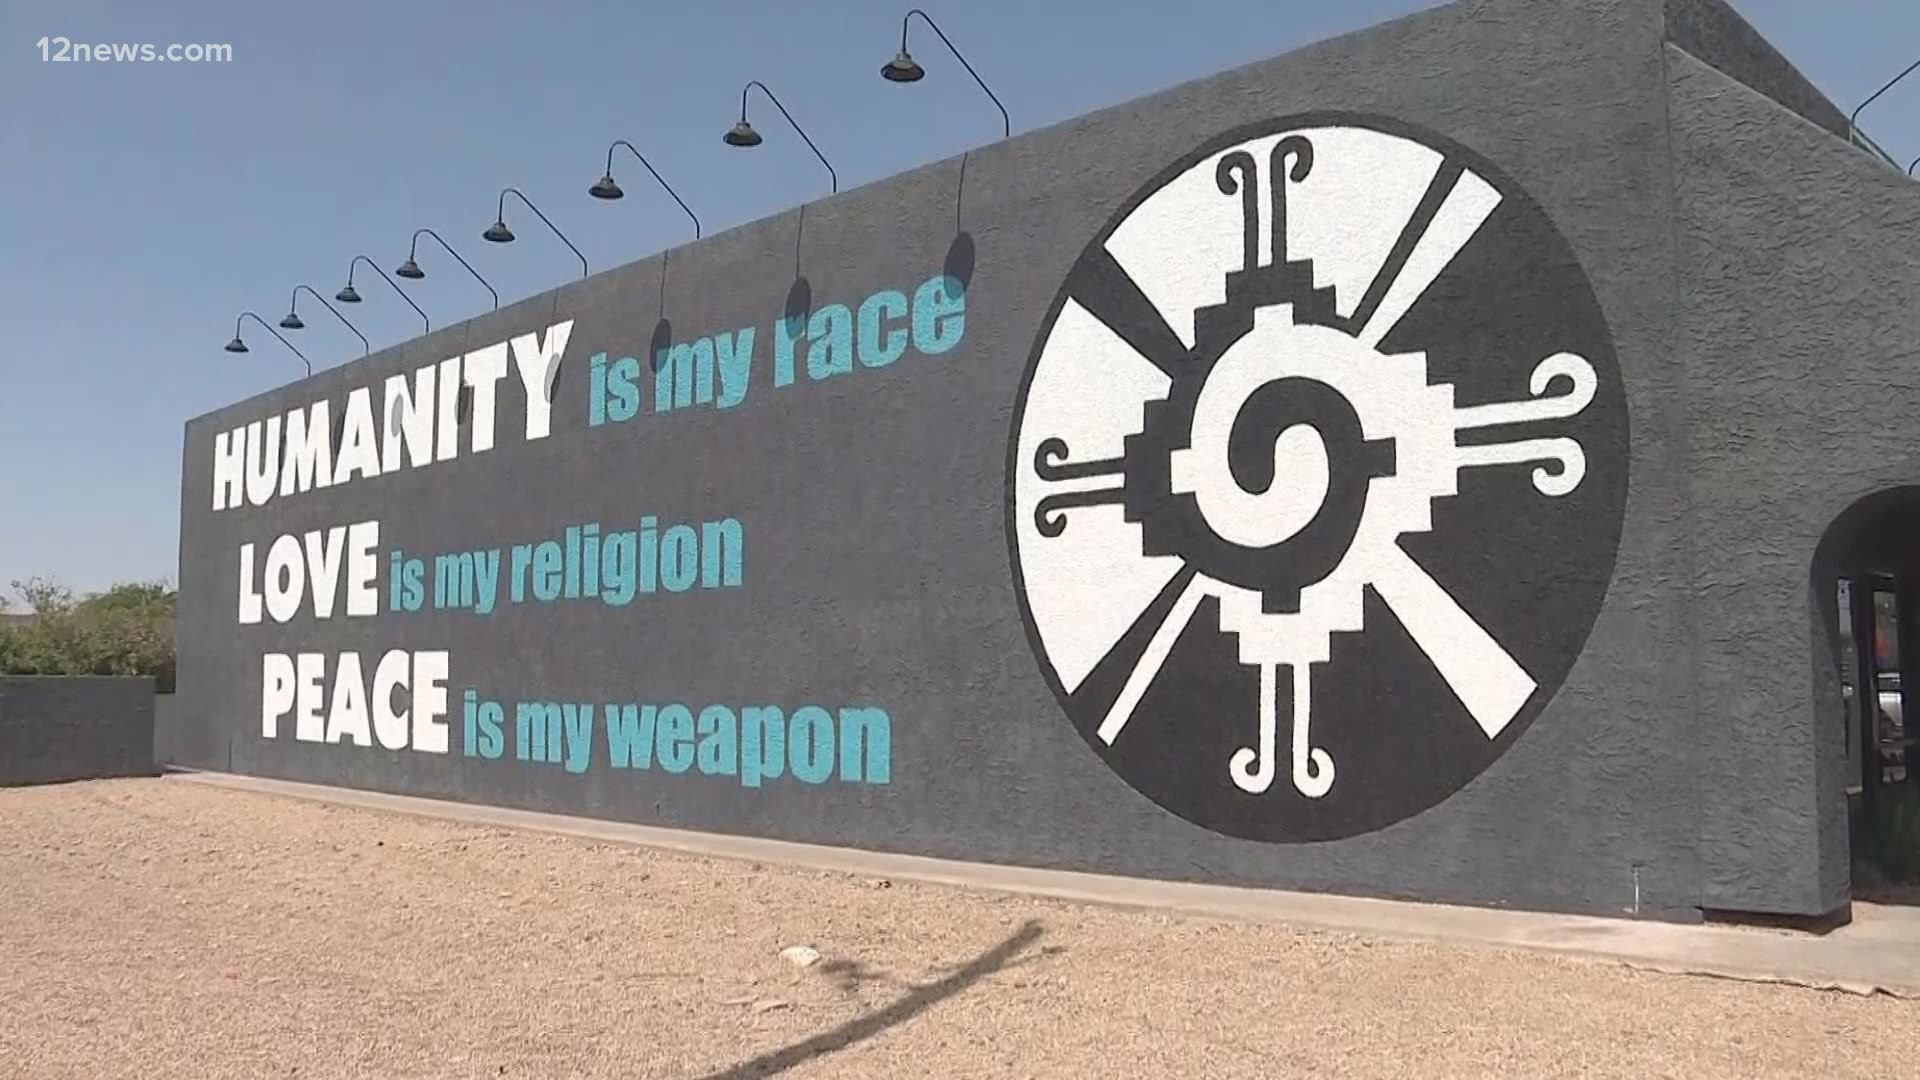 The kind gesture is painted in the form of a mural at The Tamale Store in Phoenix. It reads, "Humanity is my race. Love is my religion. Peace is my weapon."